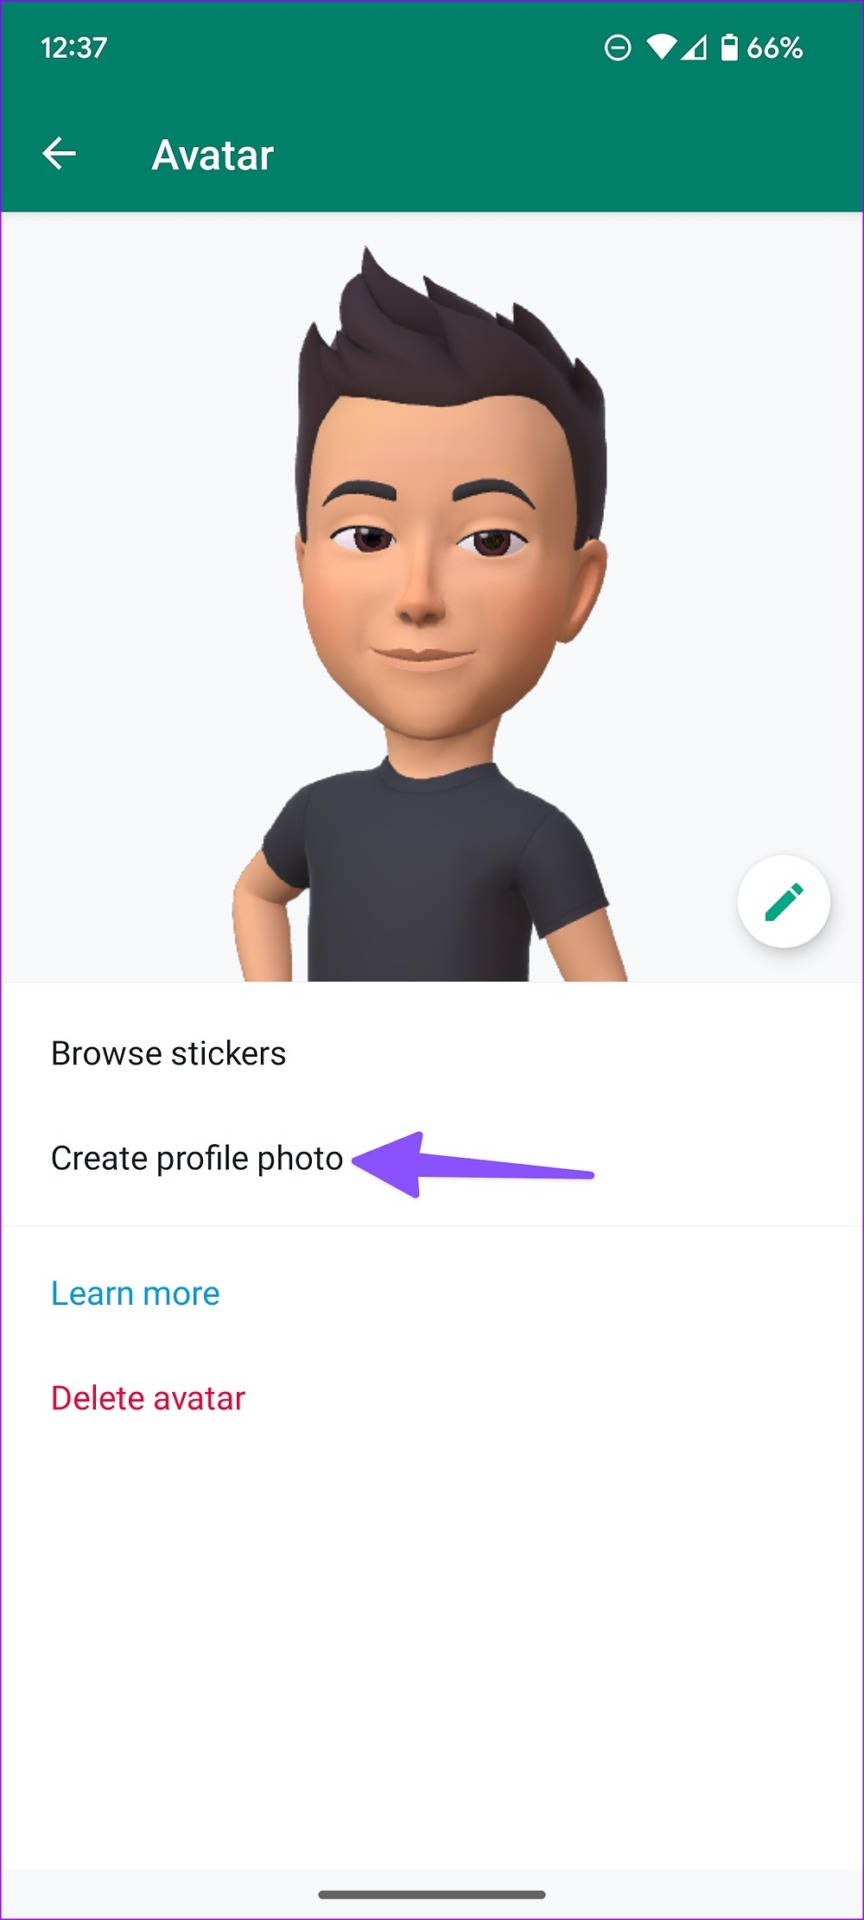 Caroline Motel lamp How to Create and Use Avatars in WhatsApp - Guiding Tech